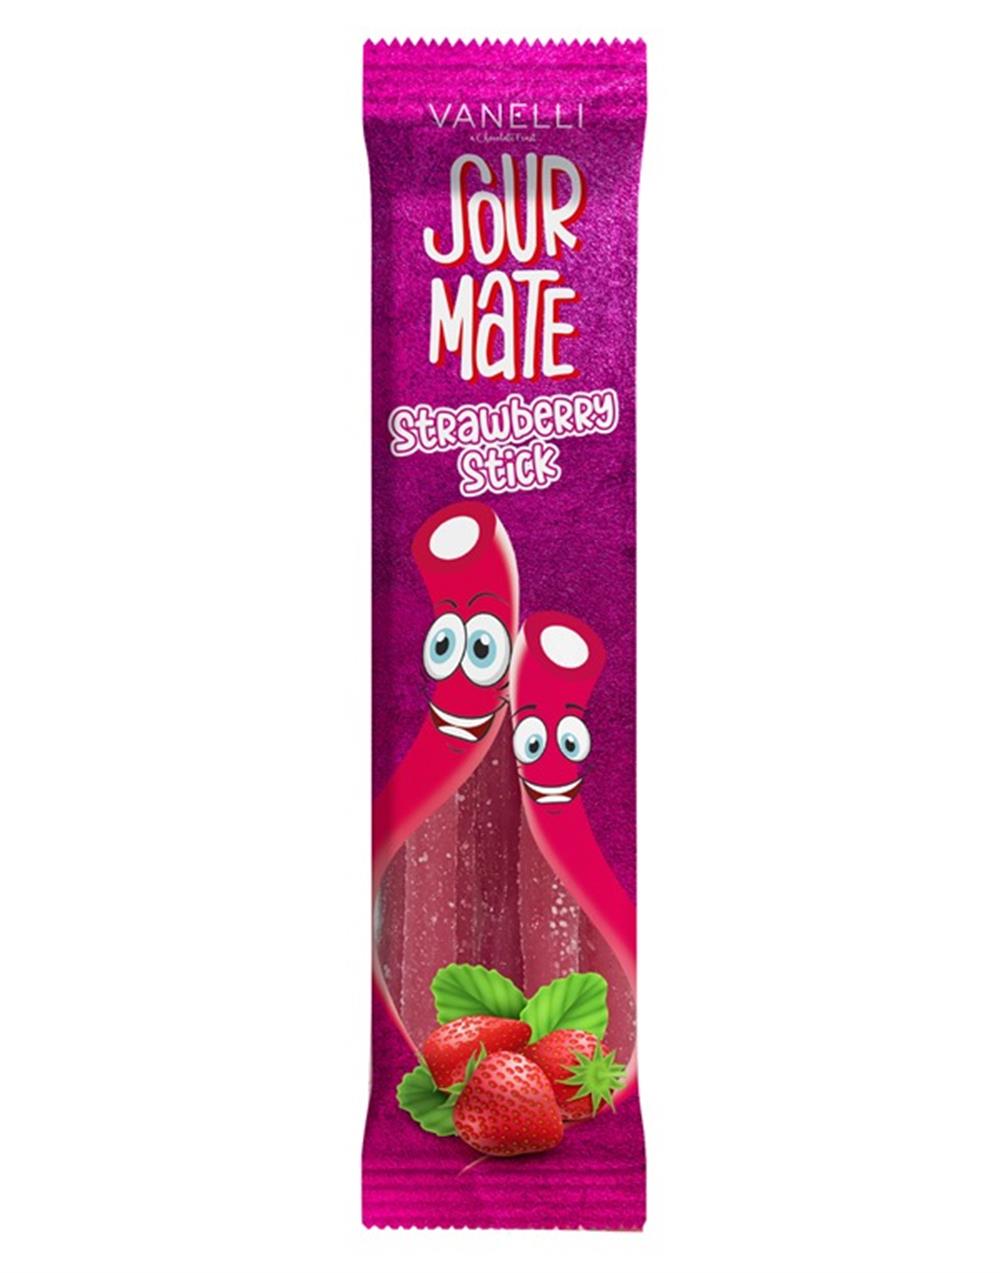 SOURMATE Sour Liqorice with strawberry